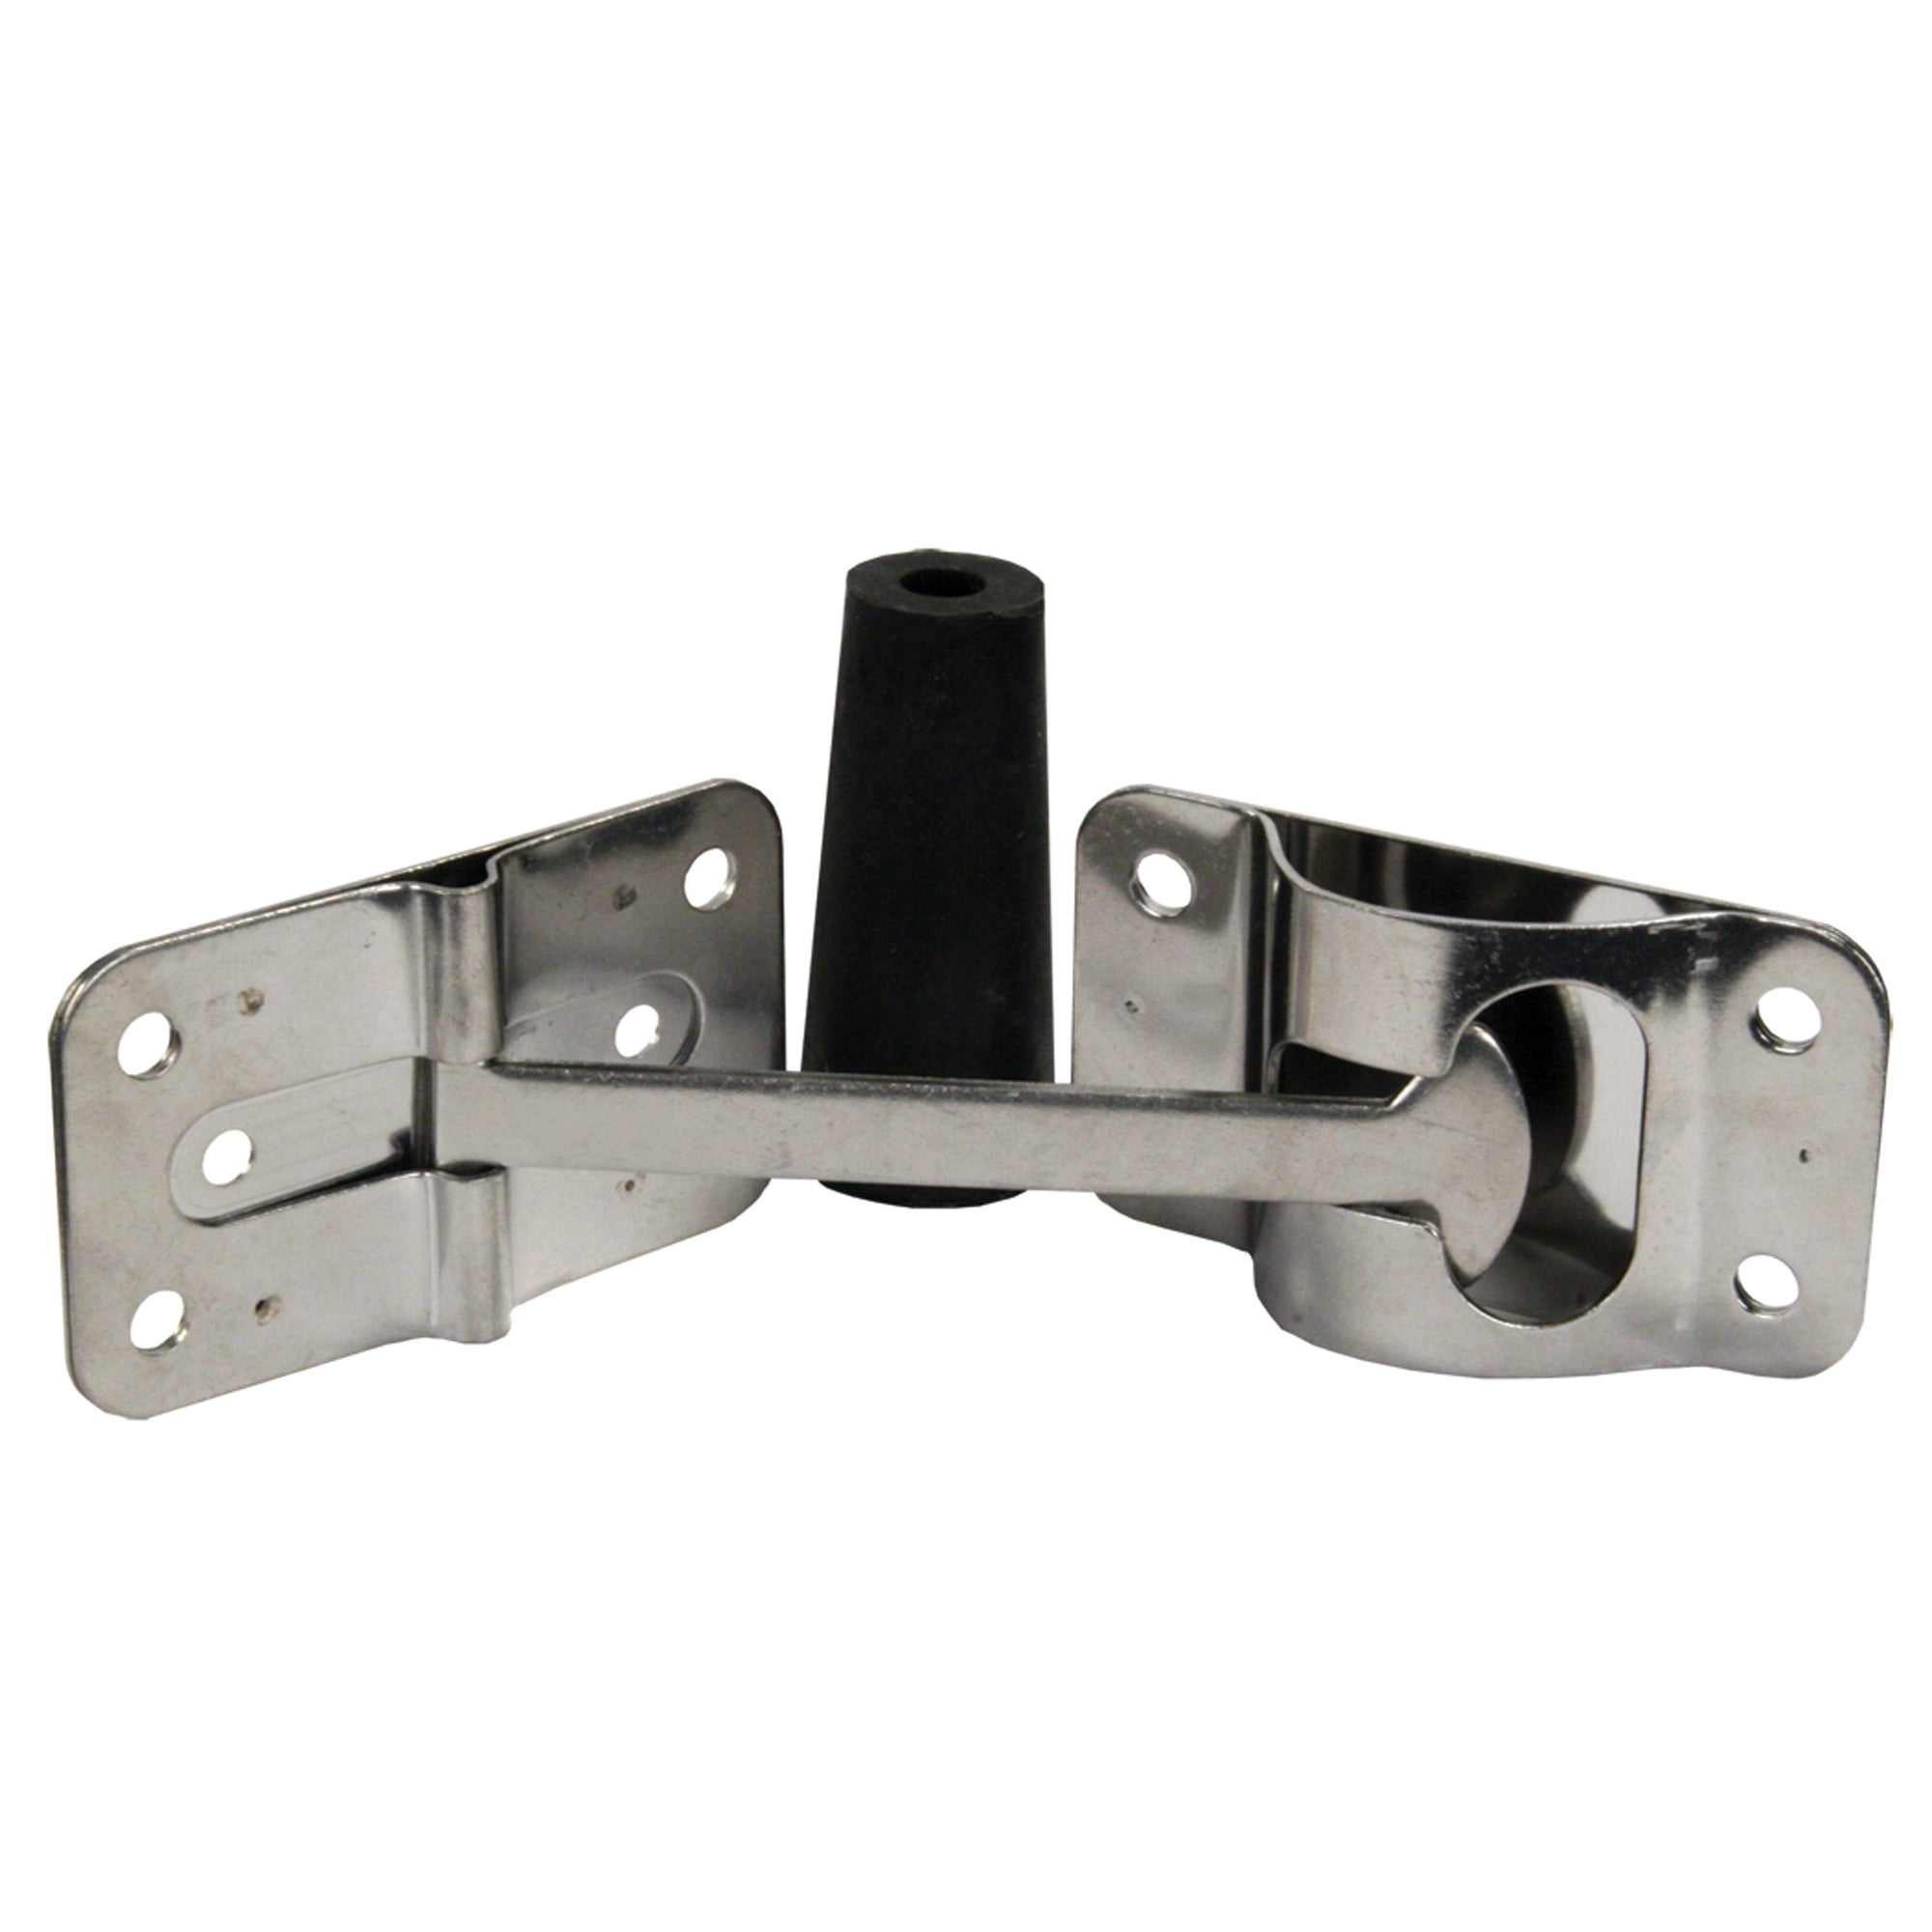 JR Products 10615 Stainless Steel Flat T-Style Door Holder - 4"